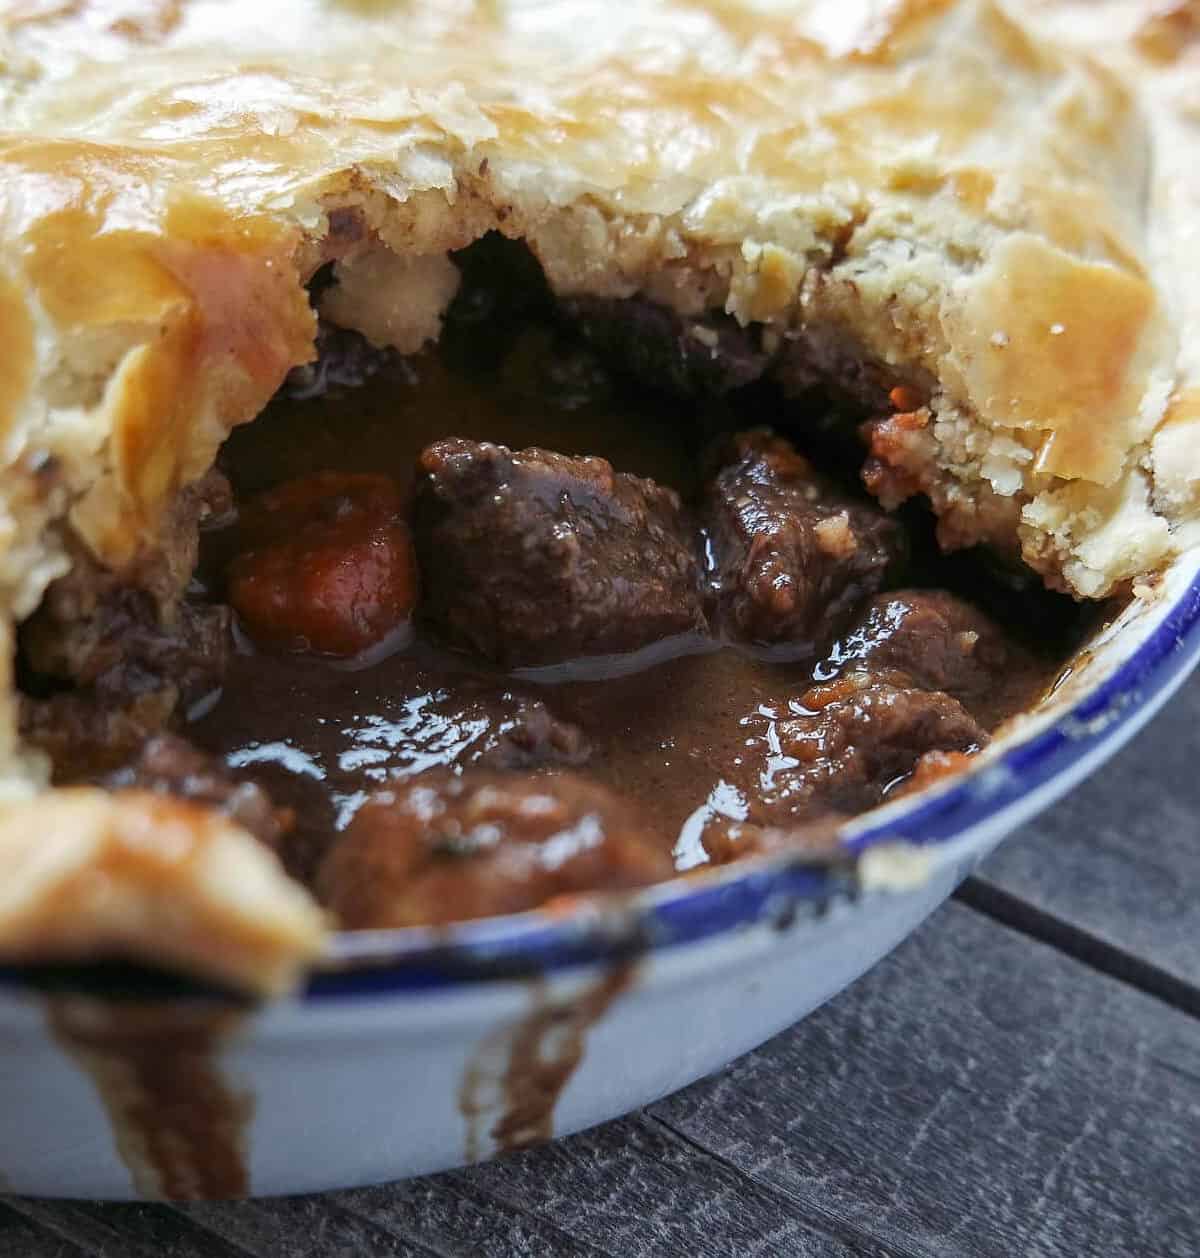  A slice of this pot pie oozes a delectable mixture of melted cheese and tender venison.